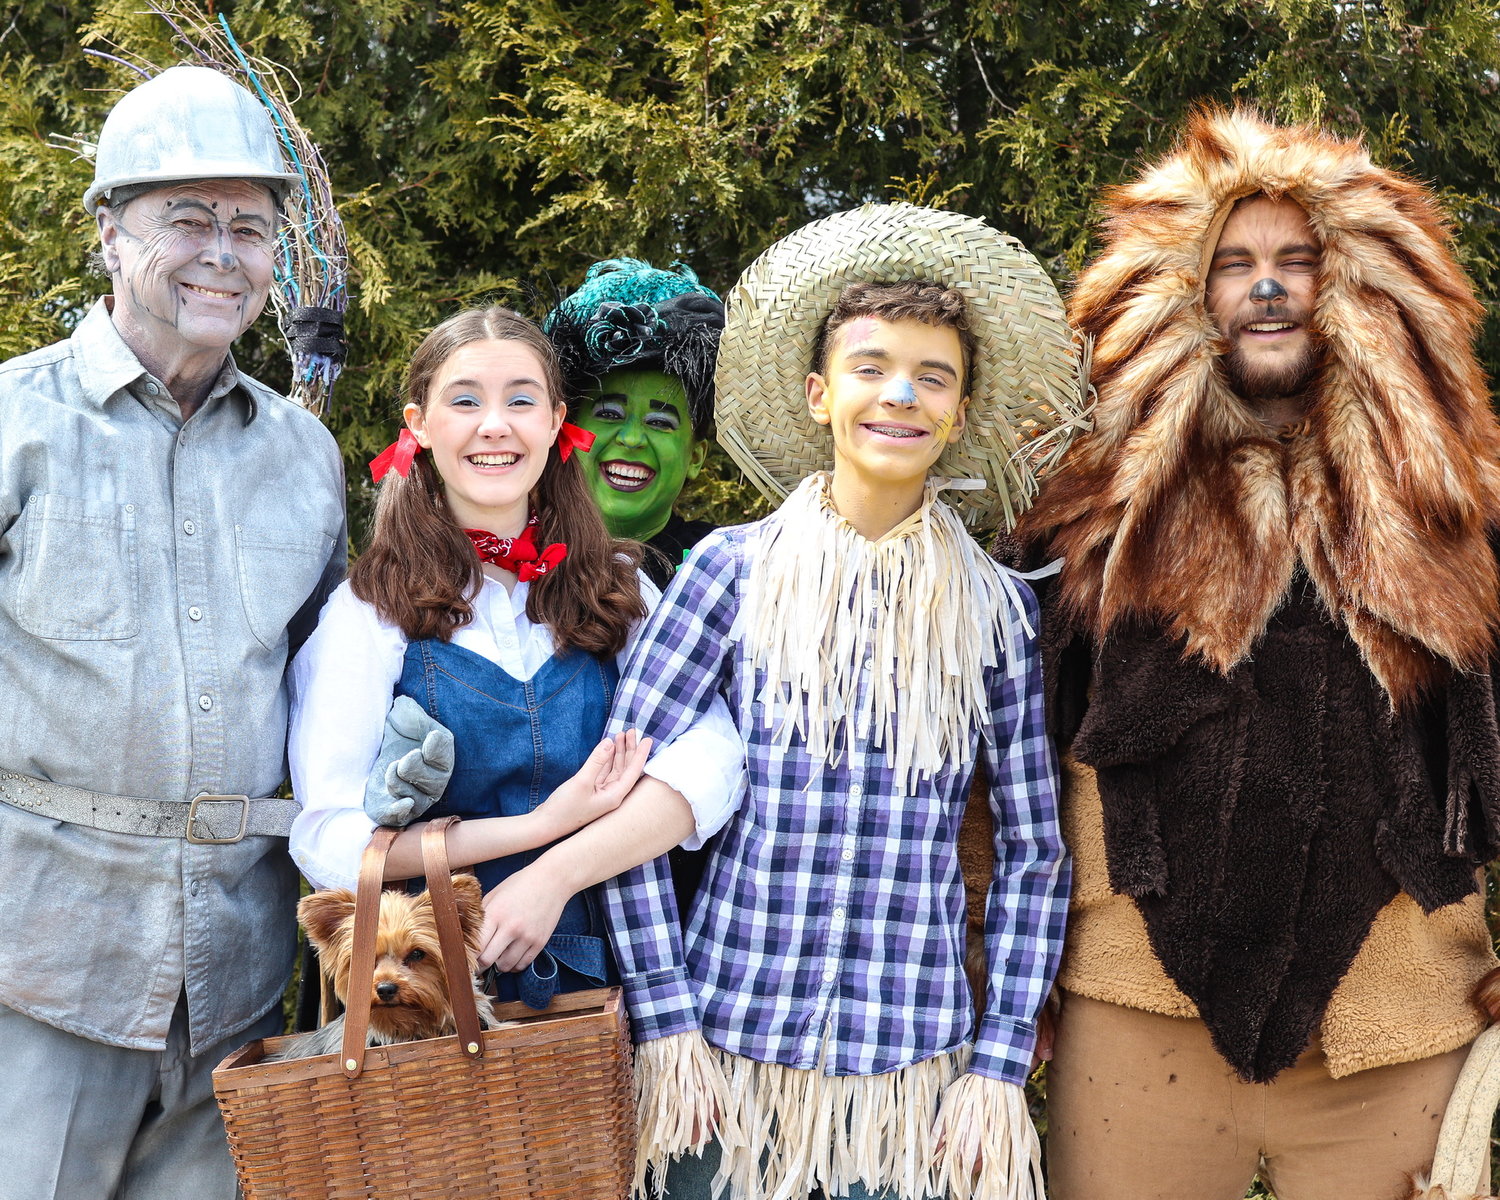 Gary Mitchell (Tin Man), Hallie Ackerman (Dorothy), Kat Koehn (Wicked Witch of the West), Brennan McKone (Scarecrow) and Dale Williams (Cowardly Lion).